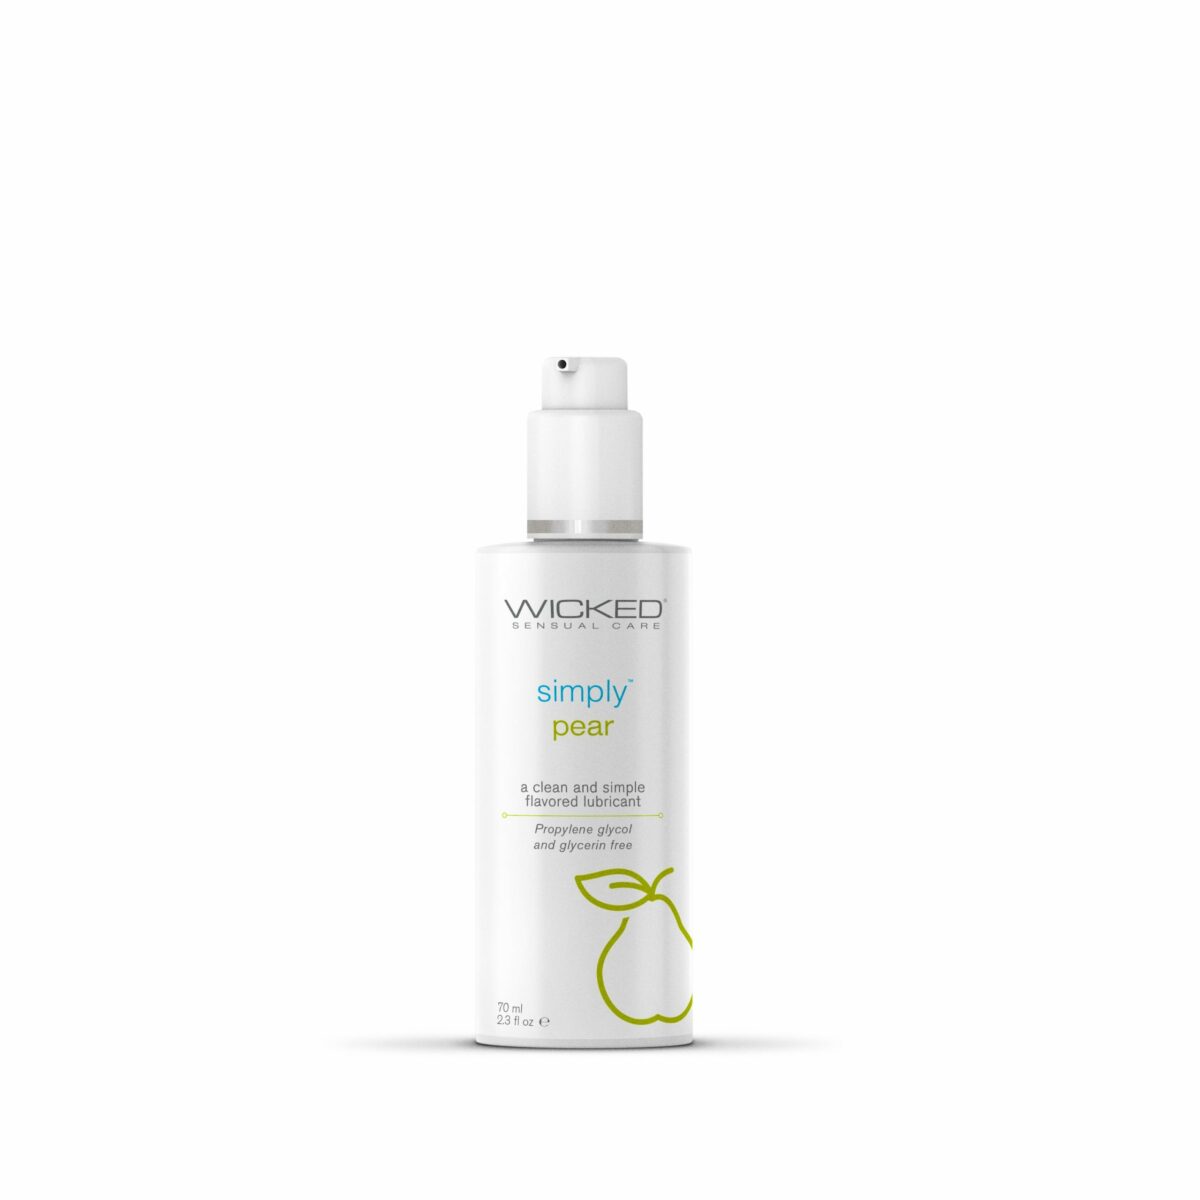 Wicked Simply Pear Water-Based Flavored Lubricant